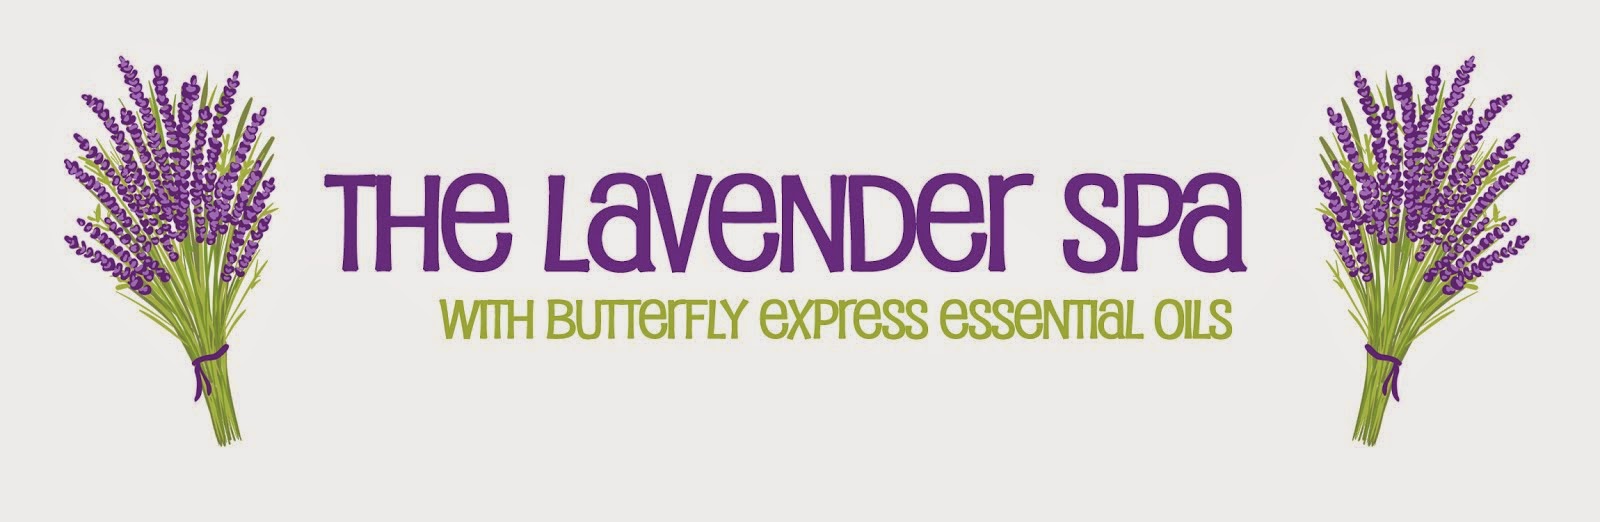 The Lavender Spa Benefits Of Lavender Essential Oil